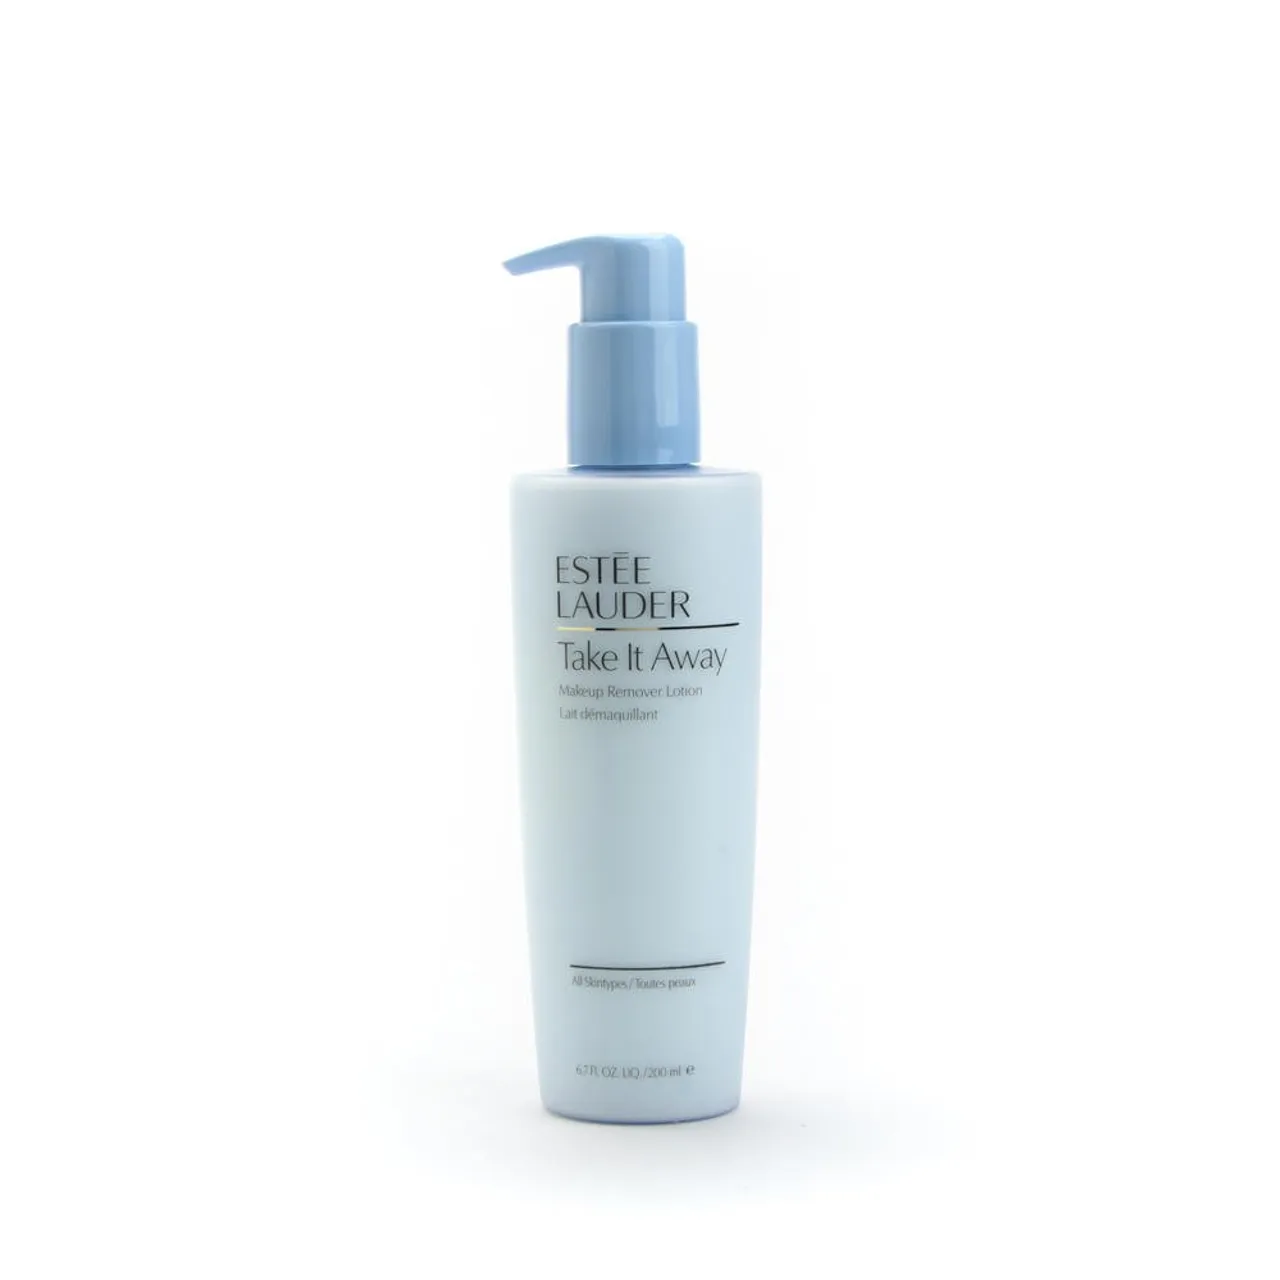 Take It Away make-up remover lotion 200 ml